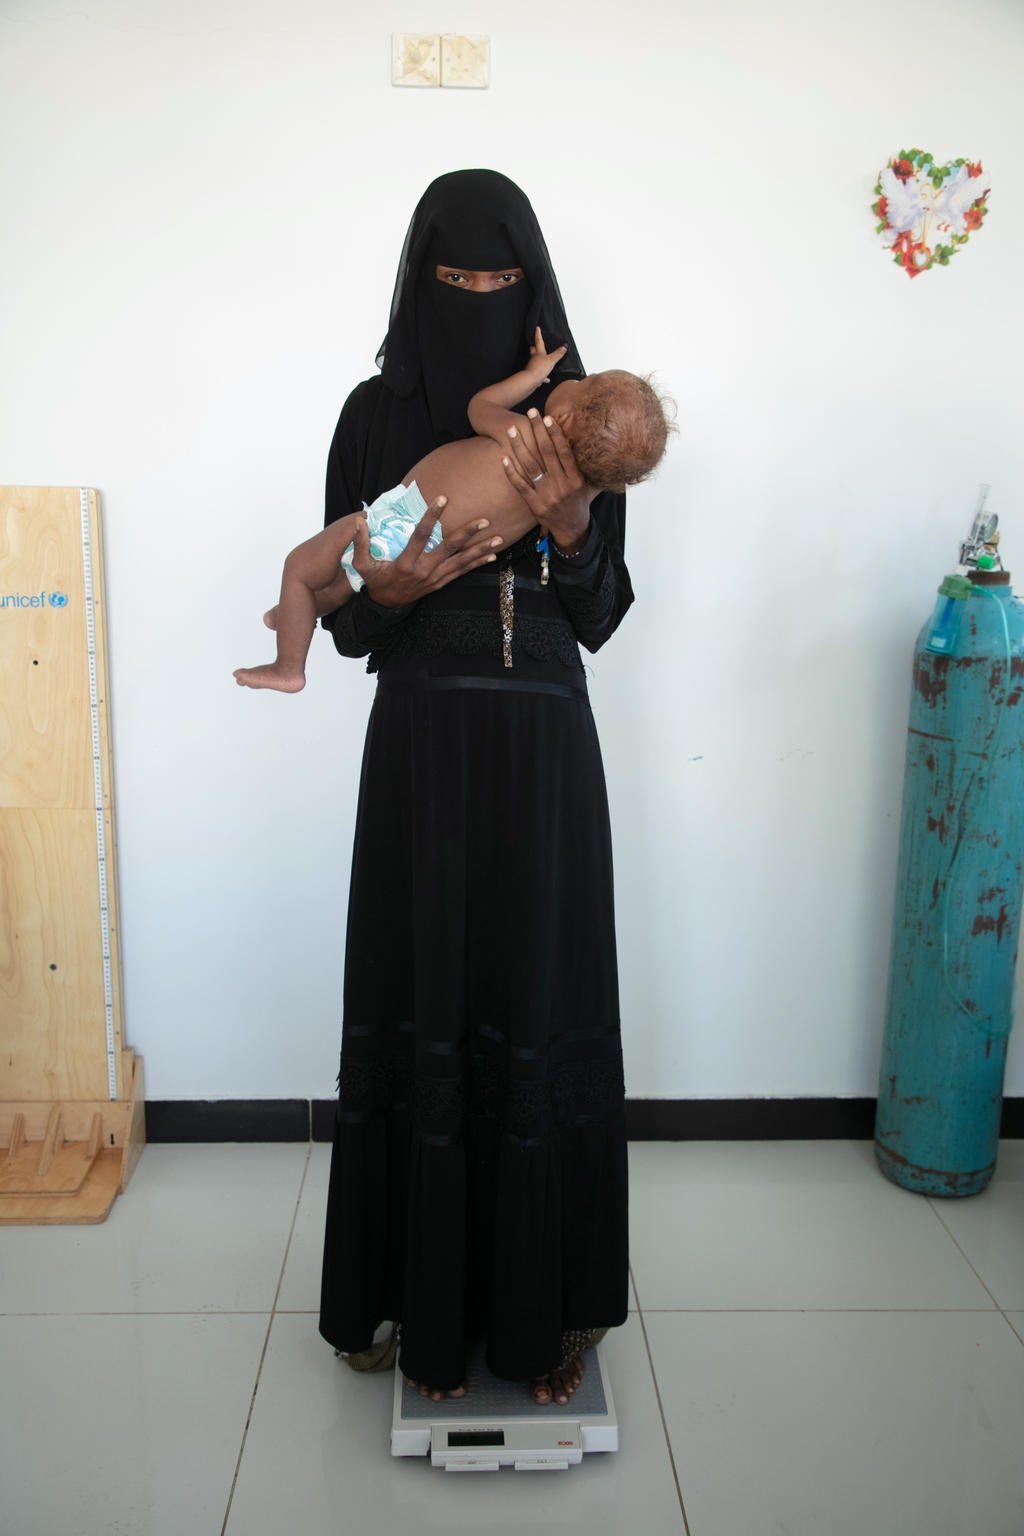 A woman in a burqa holds a baby.